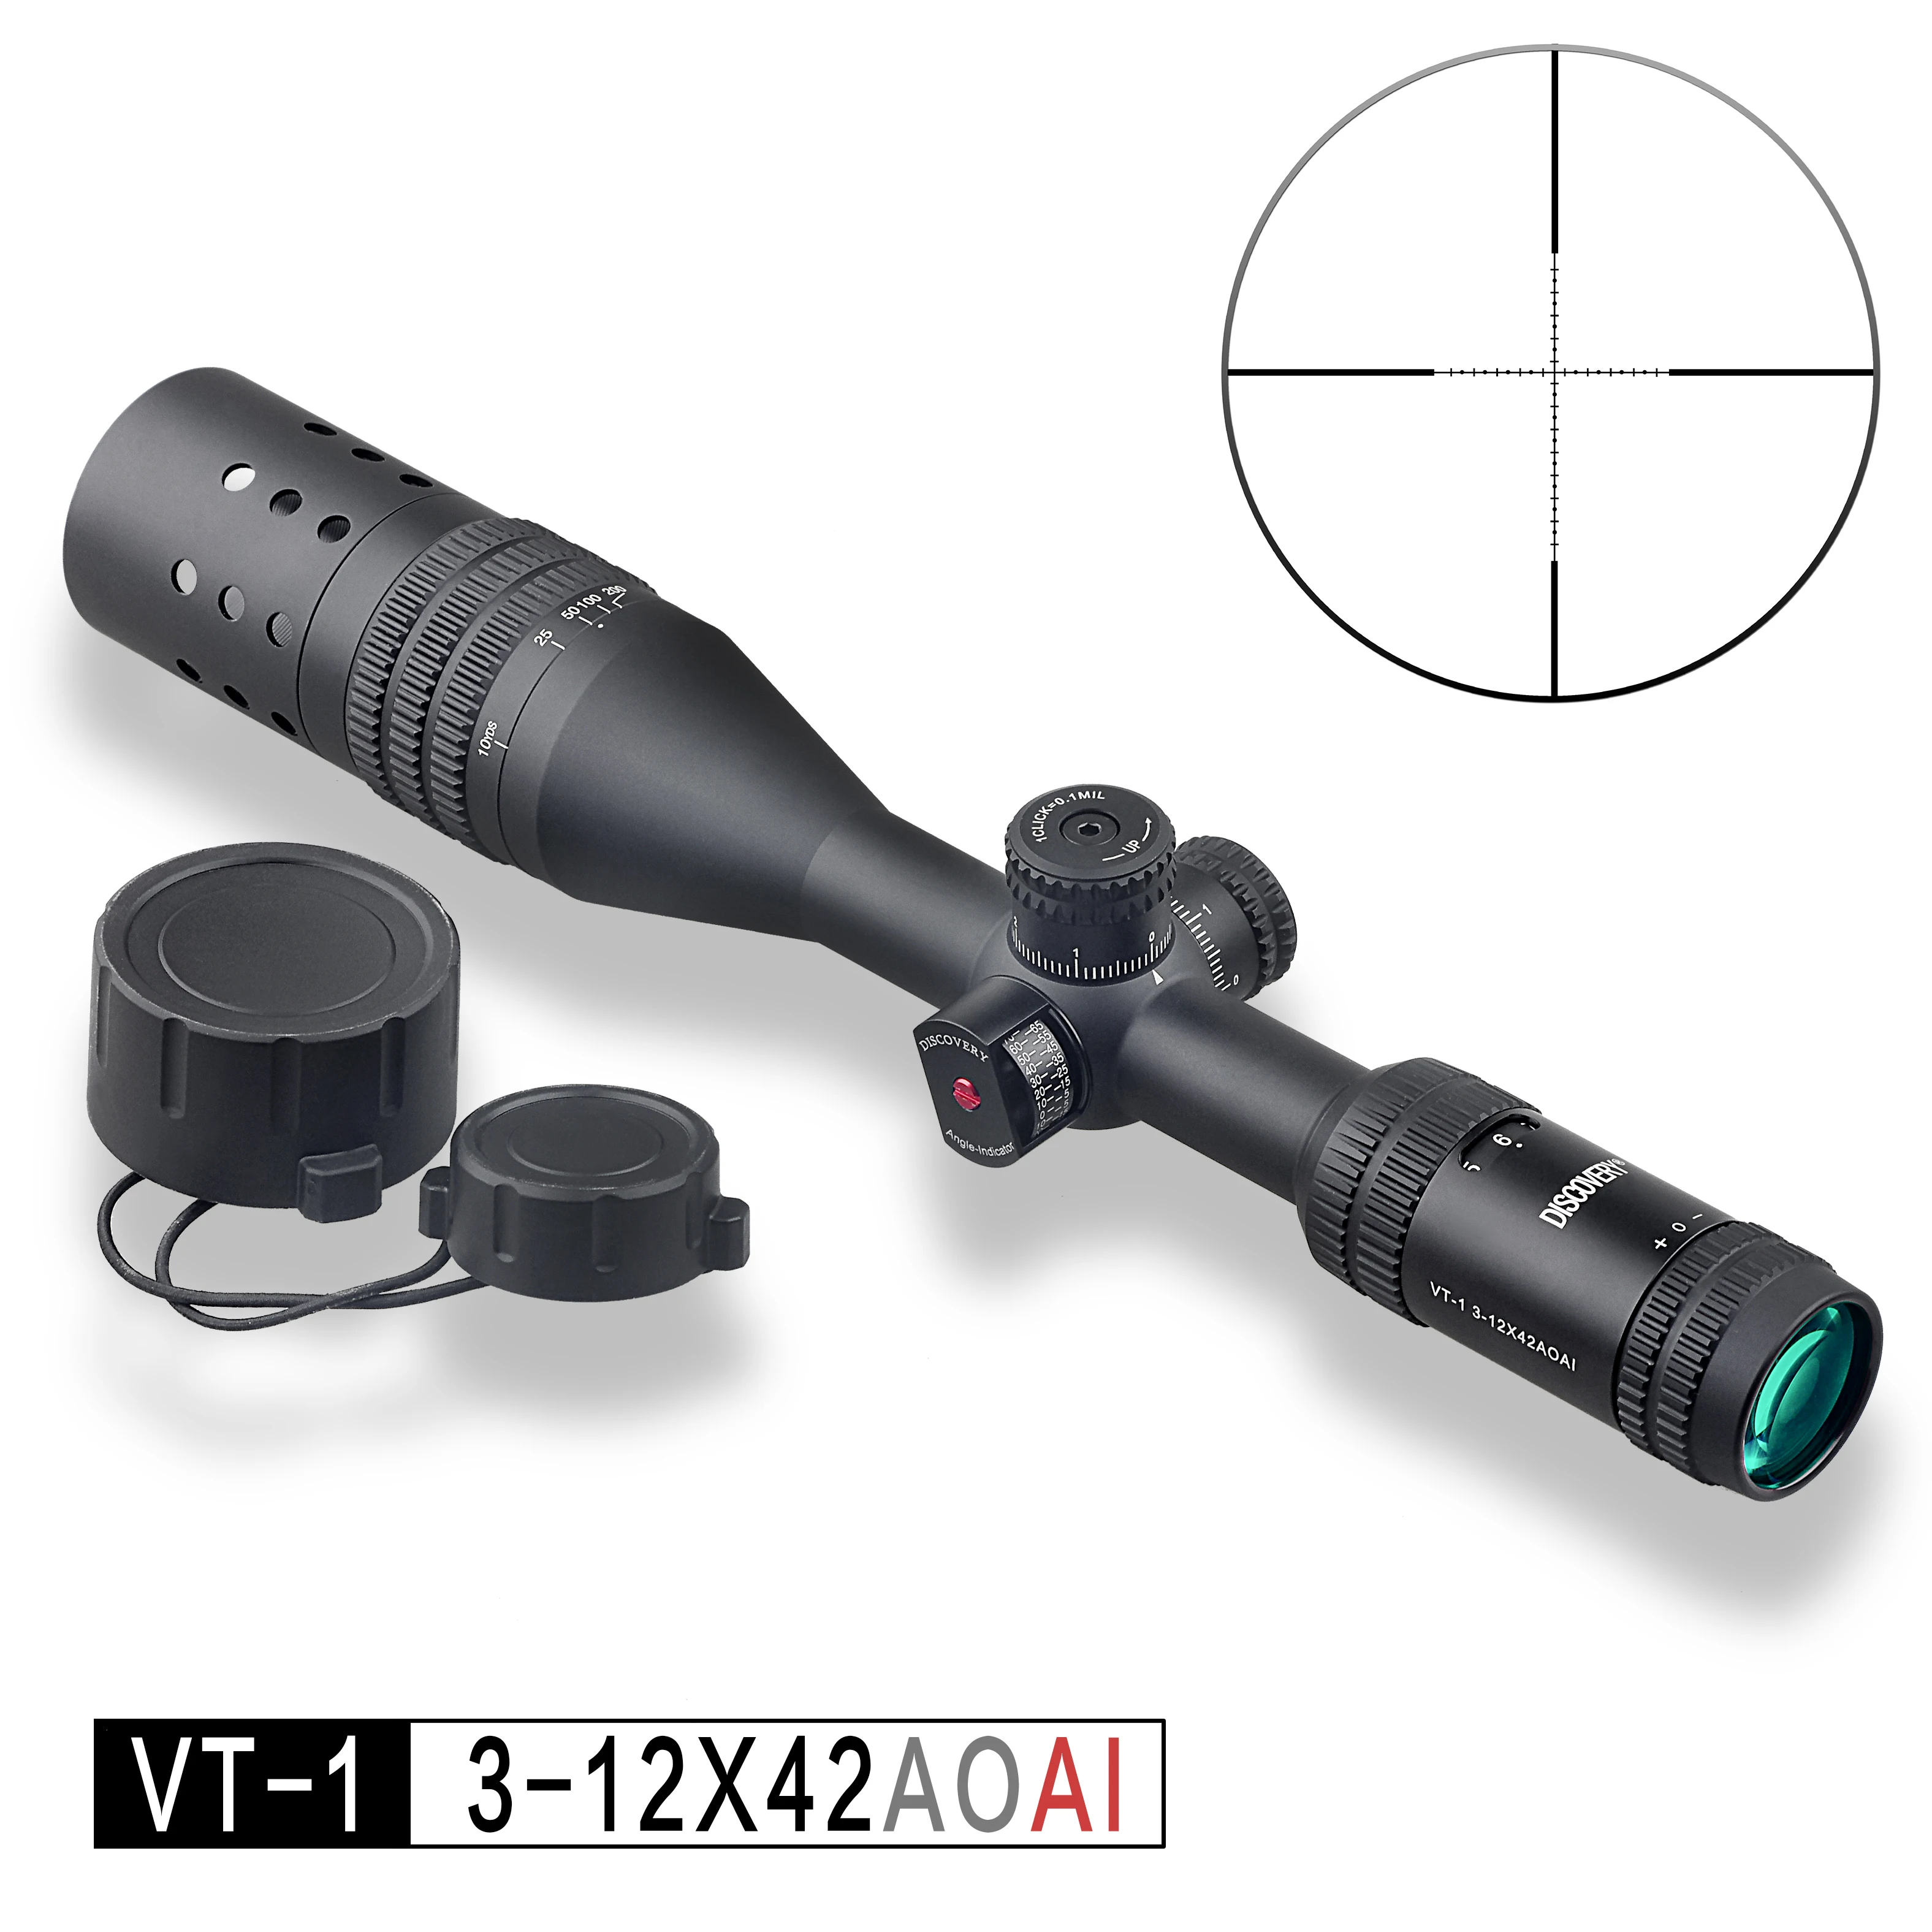 

Discovery optical rifle scope VT-1 3-12X42AOAI 1/10MIL best scope mounted spotlight for hunting and shooting